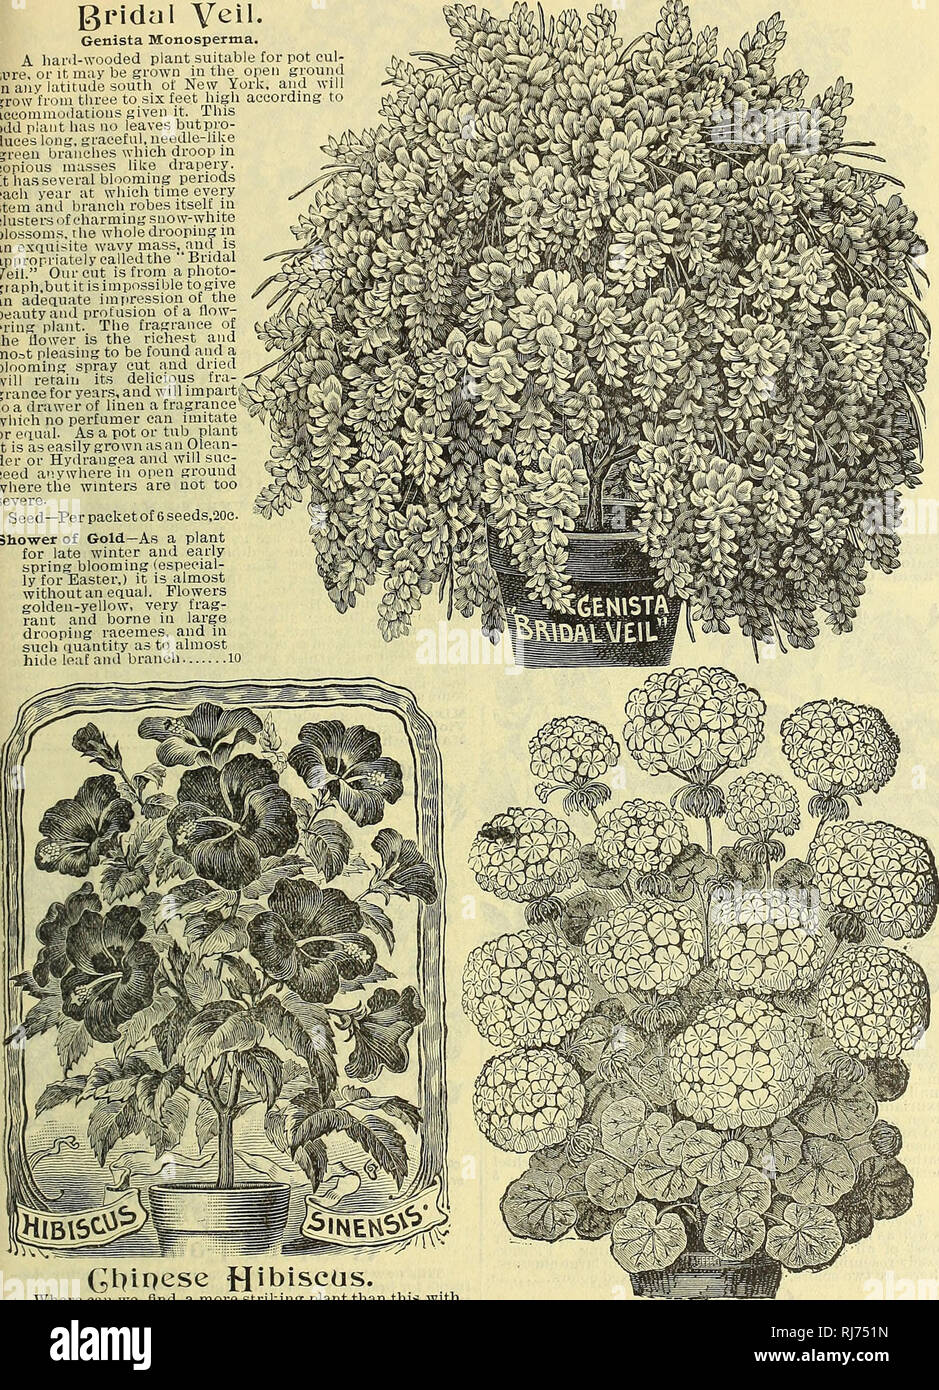 . Childs' rare flowers, vegetables, and fruits. Commercial catalogs Seeds; Nurseries (Horticulture) Catalogs; Seeds Catalogs; Flowers Catalogs; Vegetables Catalogs; Fruit trees Catalogs; John Lewis Childs (Firm); Commercial catalogs; Nurseries (Horticulture); Seeds; Flowers; Vegetables; Fruit trees. SPRING CATALOGUE OF SEEDS BULBS AND PLANTS FOR 1907. 49 gridal Veil. Genista Monosperma. A hard-wooded plant suitable for pot cul- ture, or it may be grown in the open ground in anv latitude south ot New York, and will grow'from three to six feet high according to accommodations given it. This odd  Stock Photo